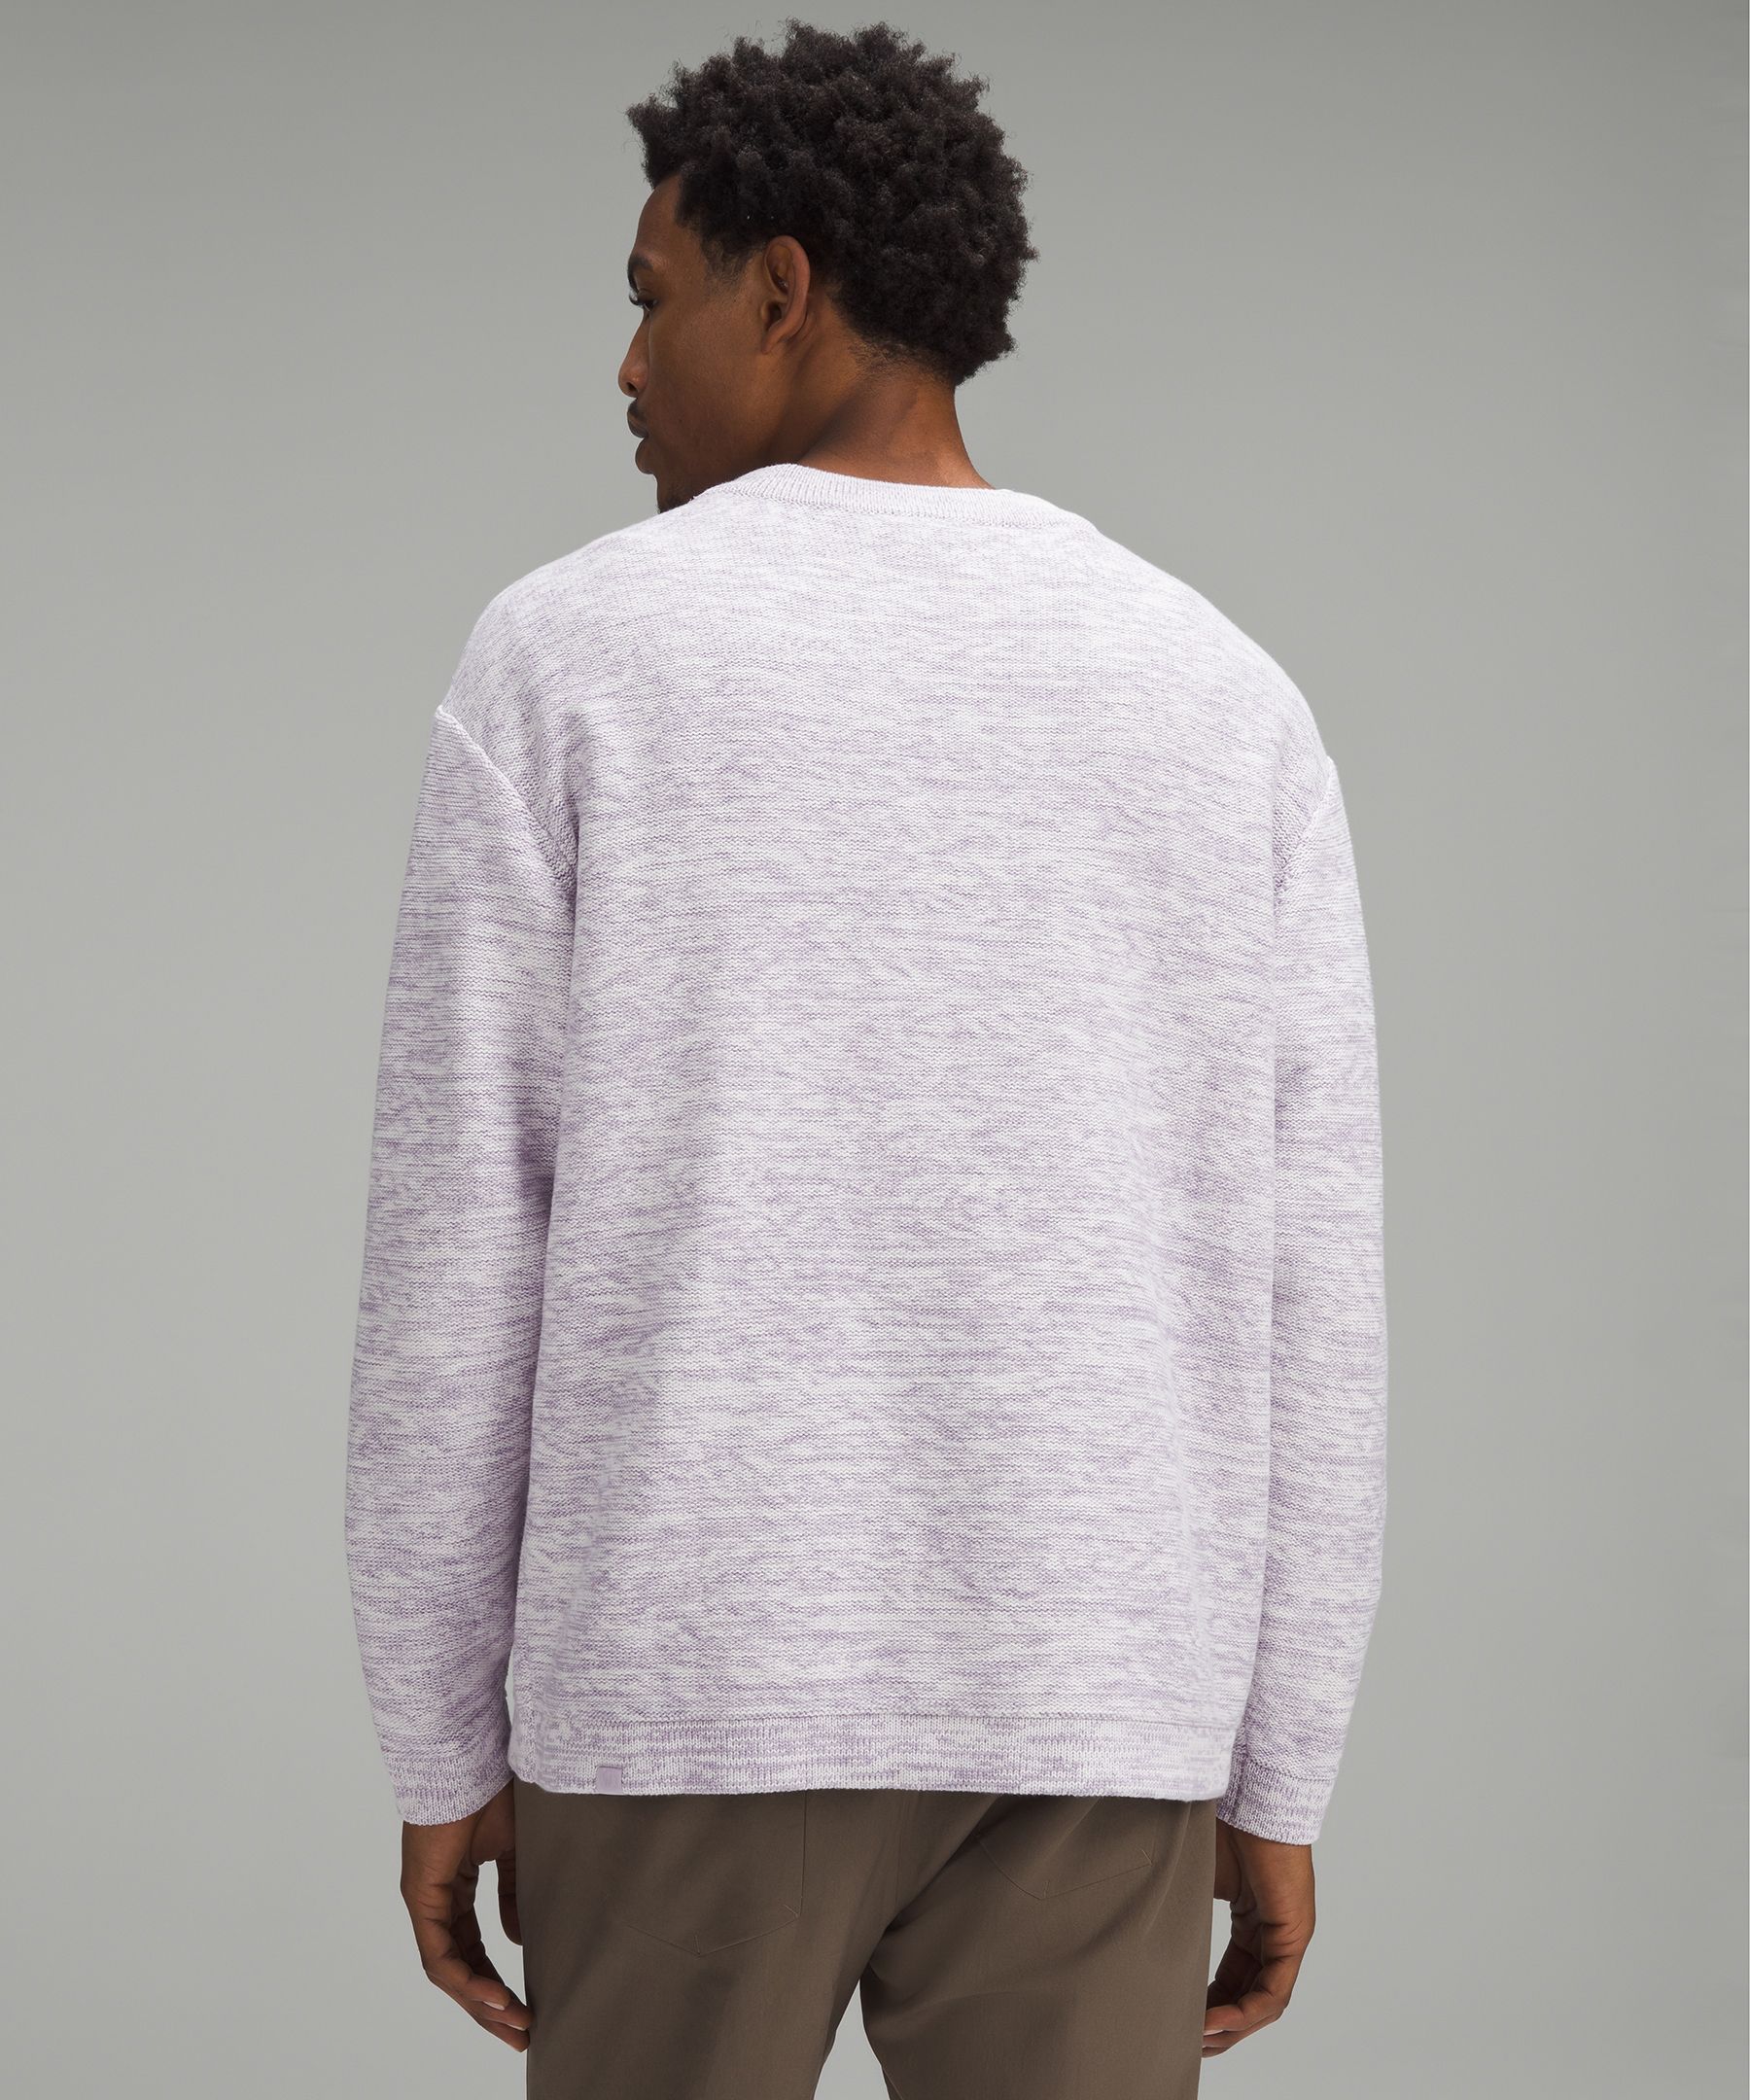 Relaxed-Fit Crewneck Knit Sweater | Men's Hoodies & Sweatshirts